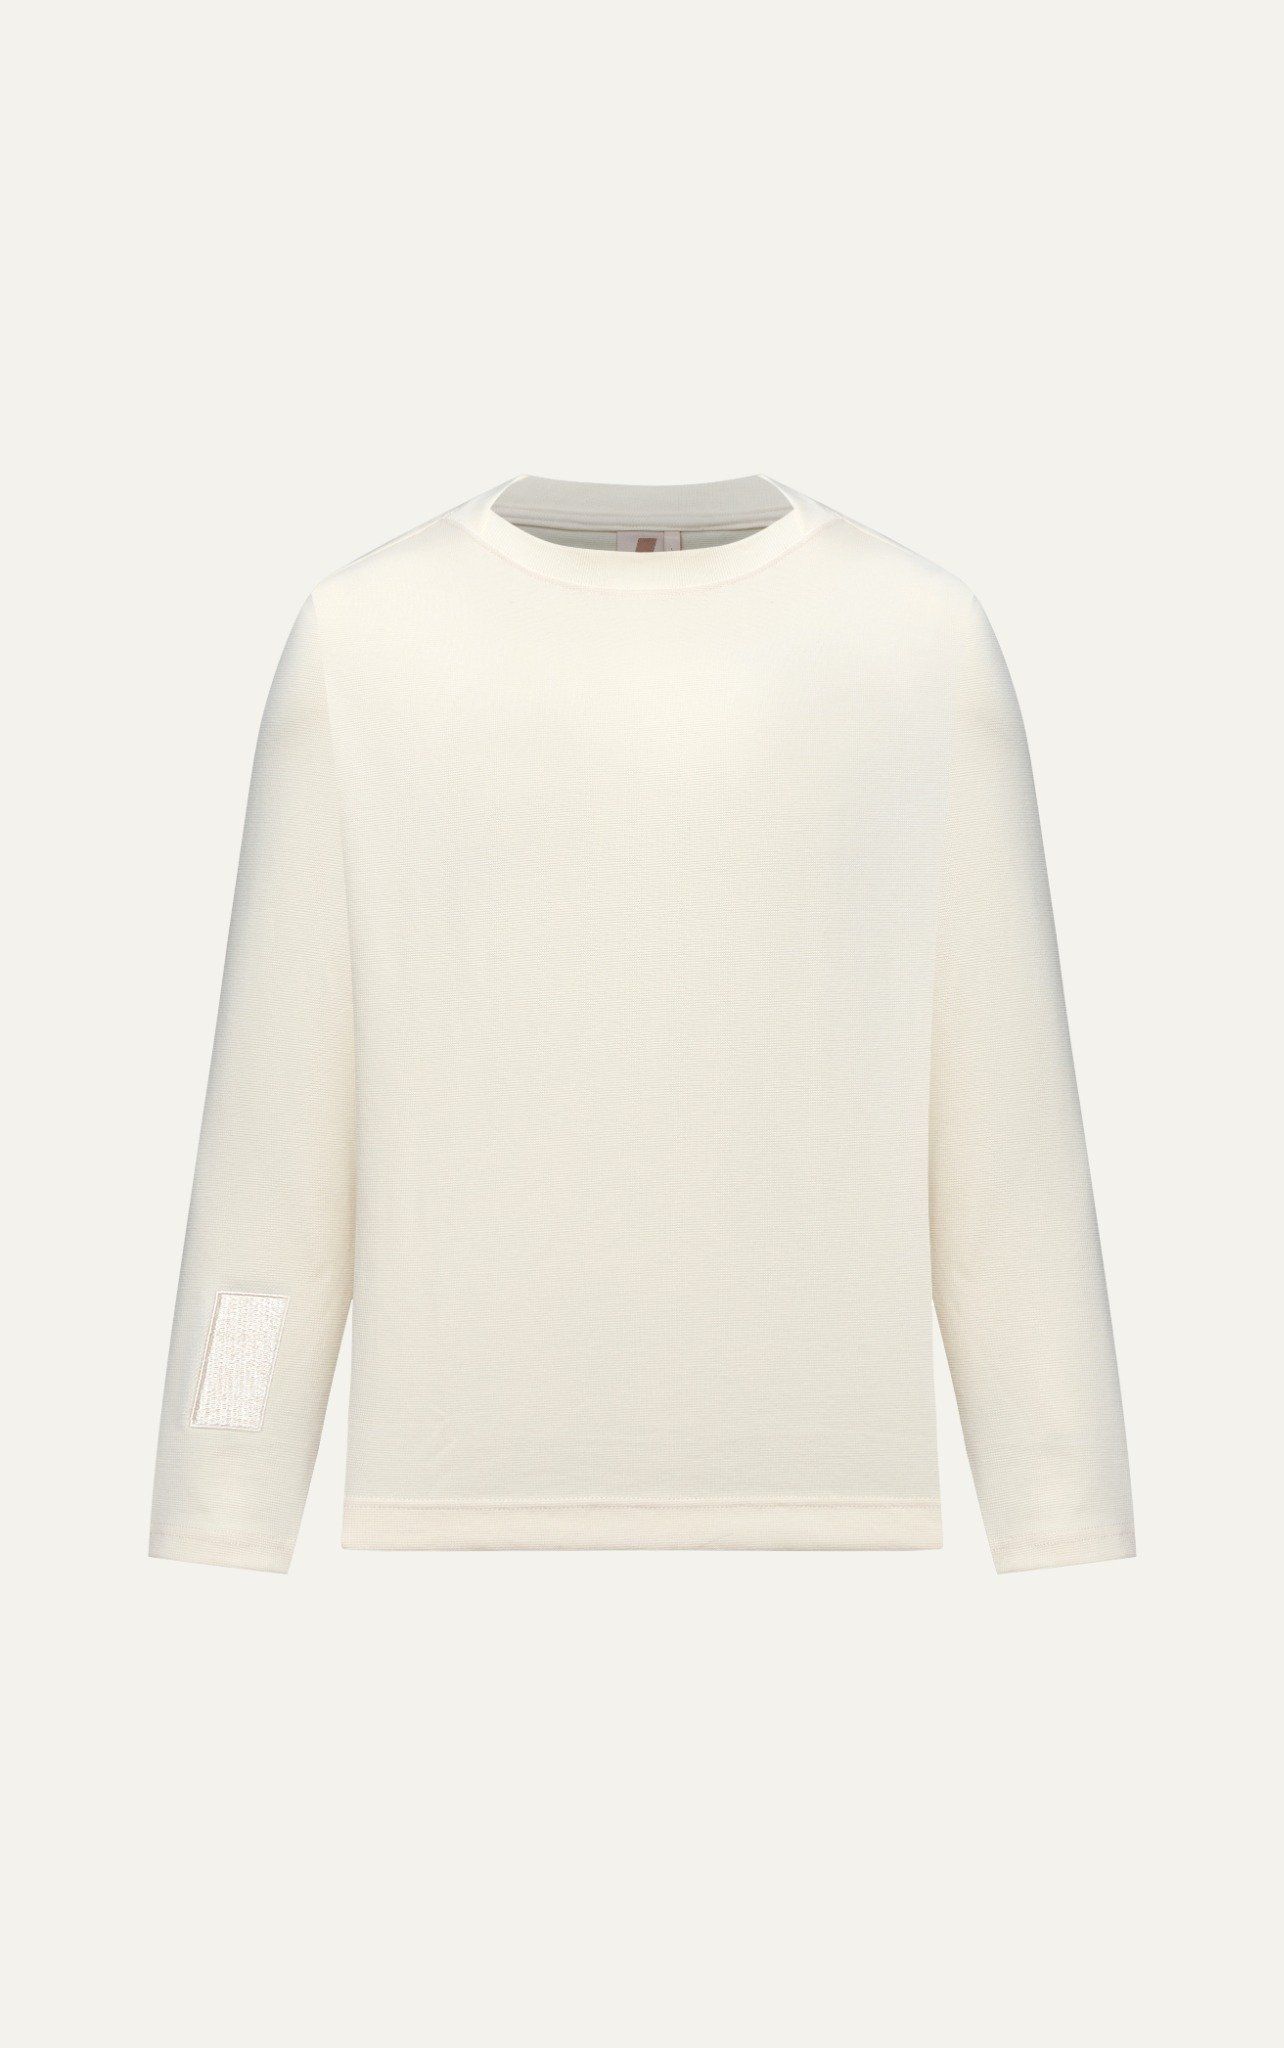  AG05 STUDIO LOOSE FIT LONG SLEEVED T-SHIRT - OFF WHITE 